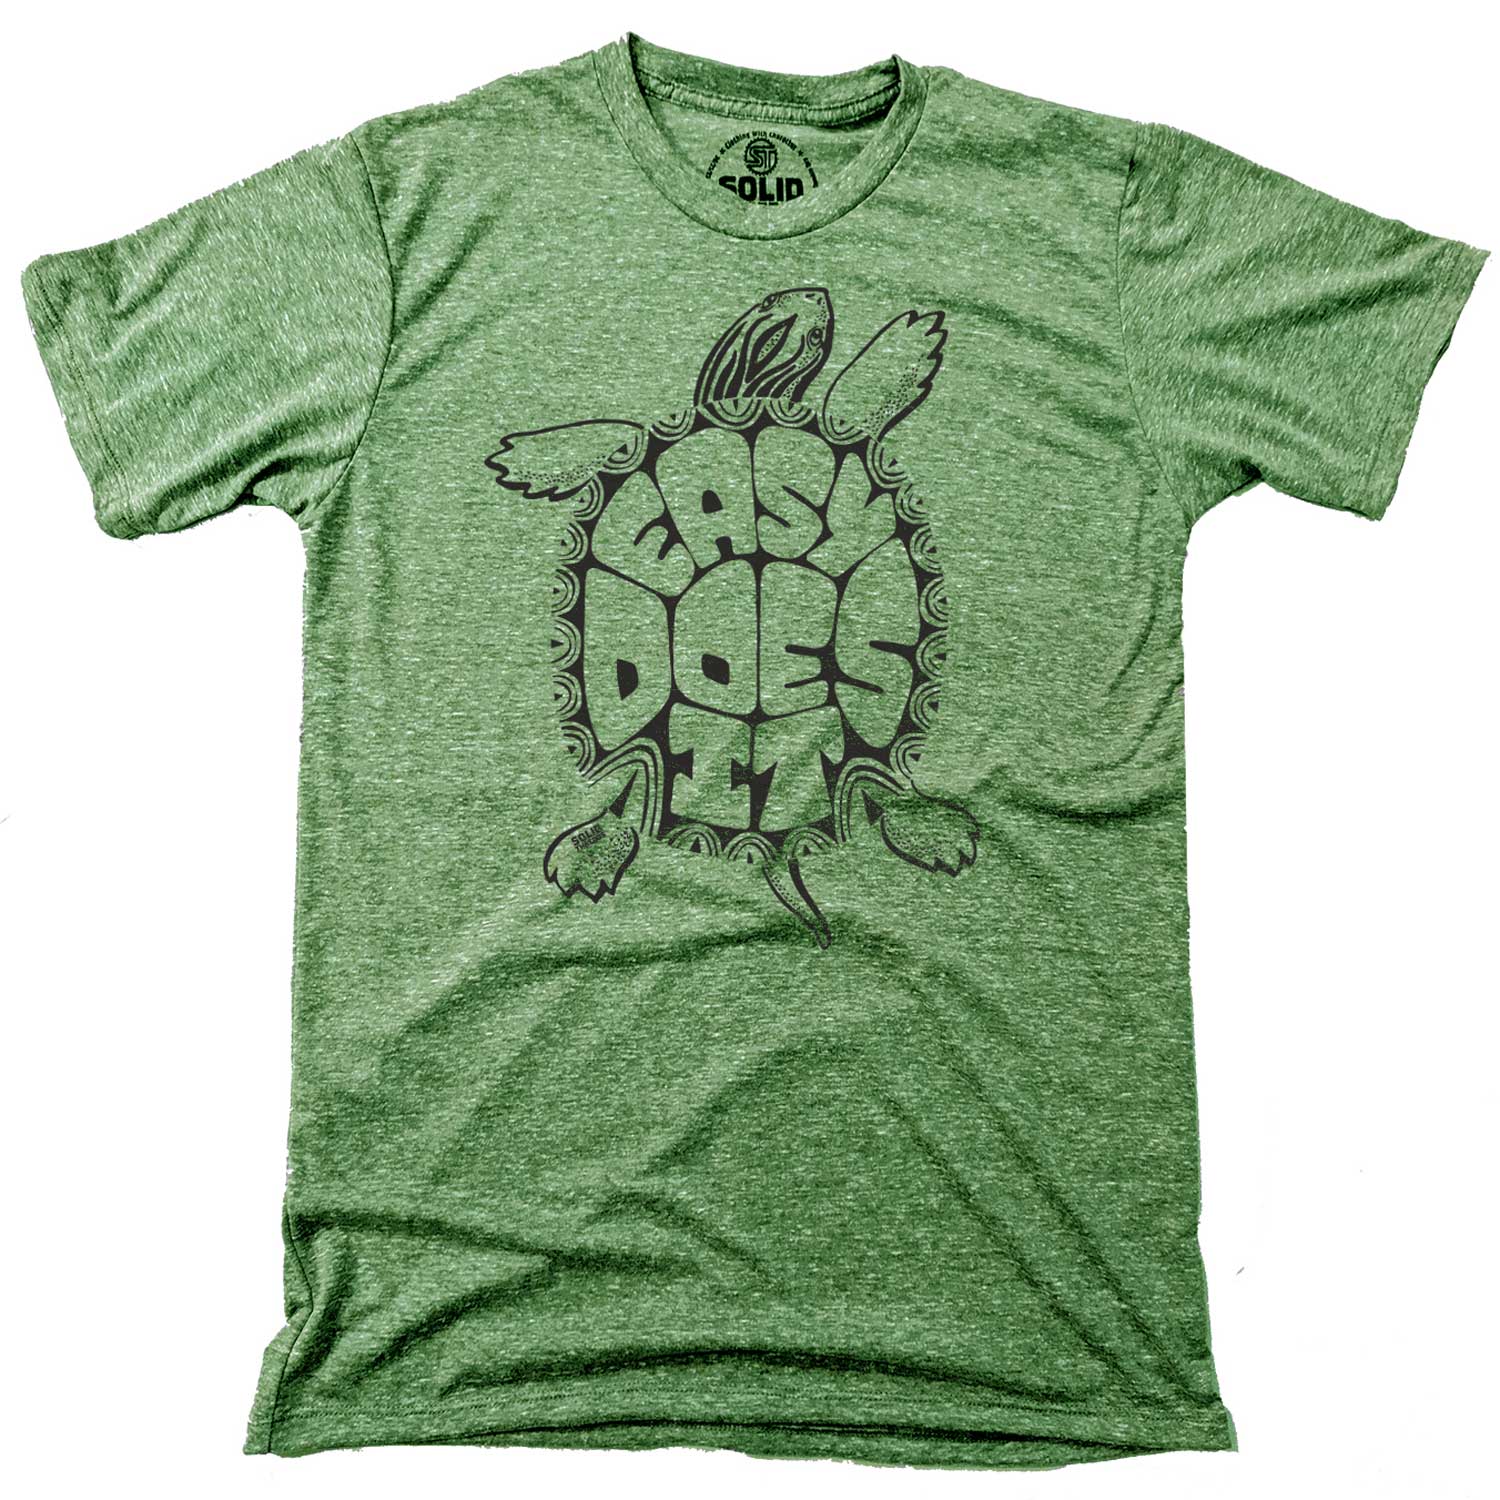 https://cdn.shopify.com/s/files/1/1670/8045/products/mens_easy_does_it_vintage_triblend_kelly_tee_shirt_cool_funny_turtle_graphic_1600x.jpg?v=1612299828